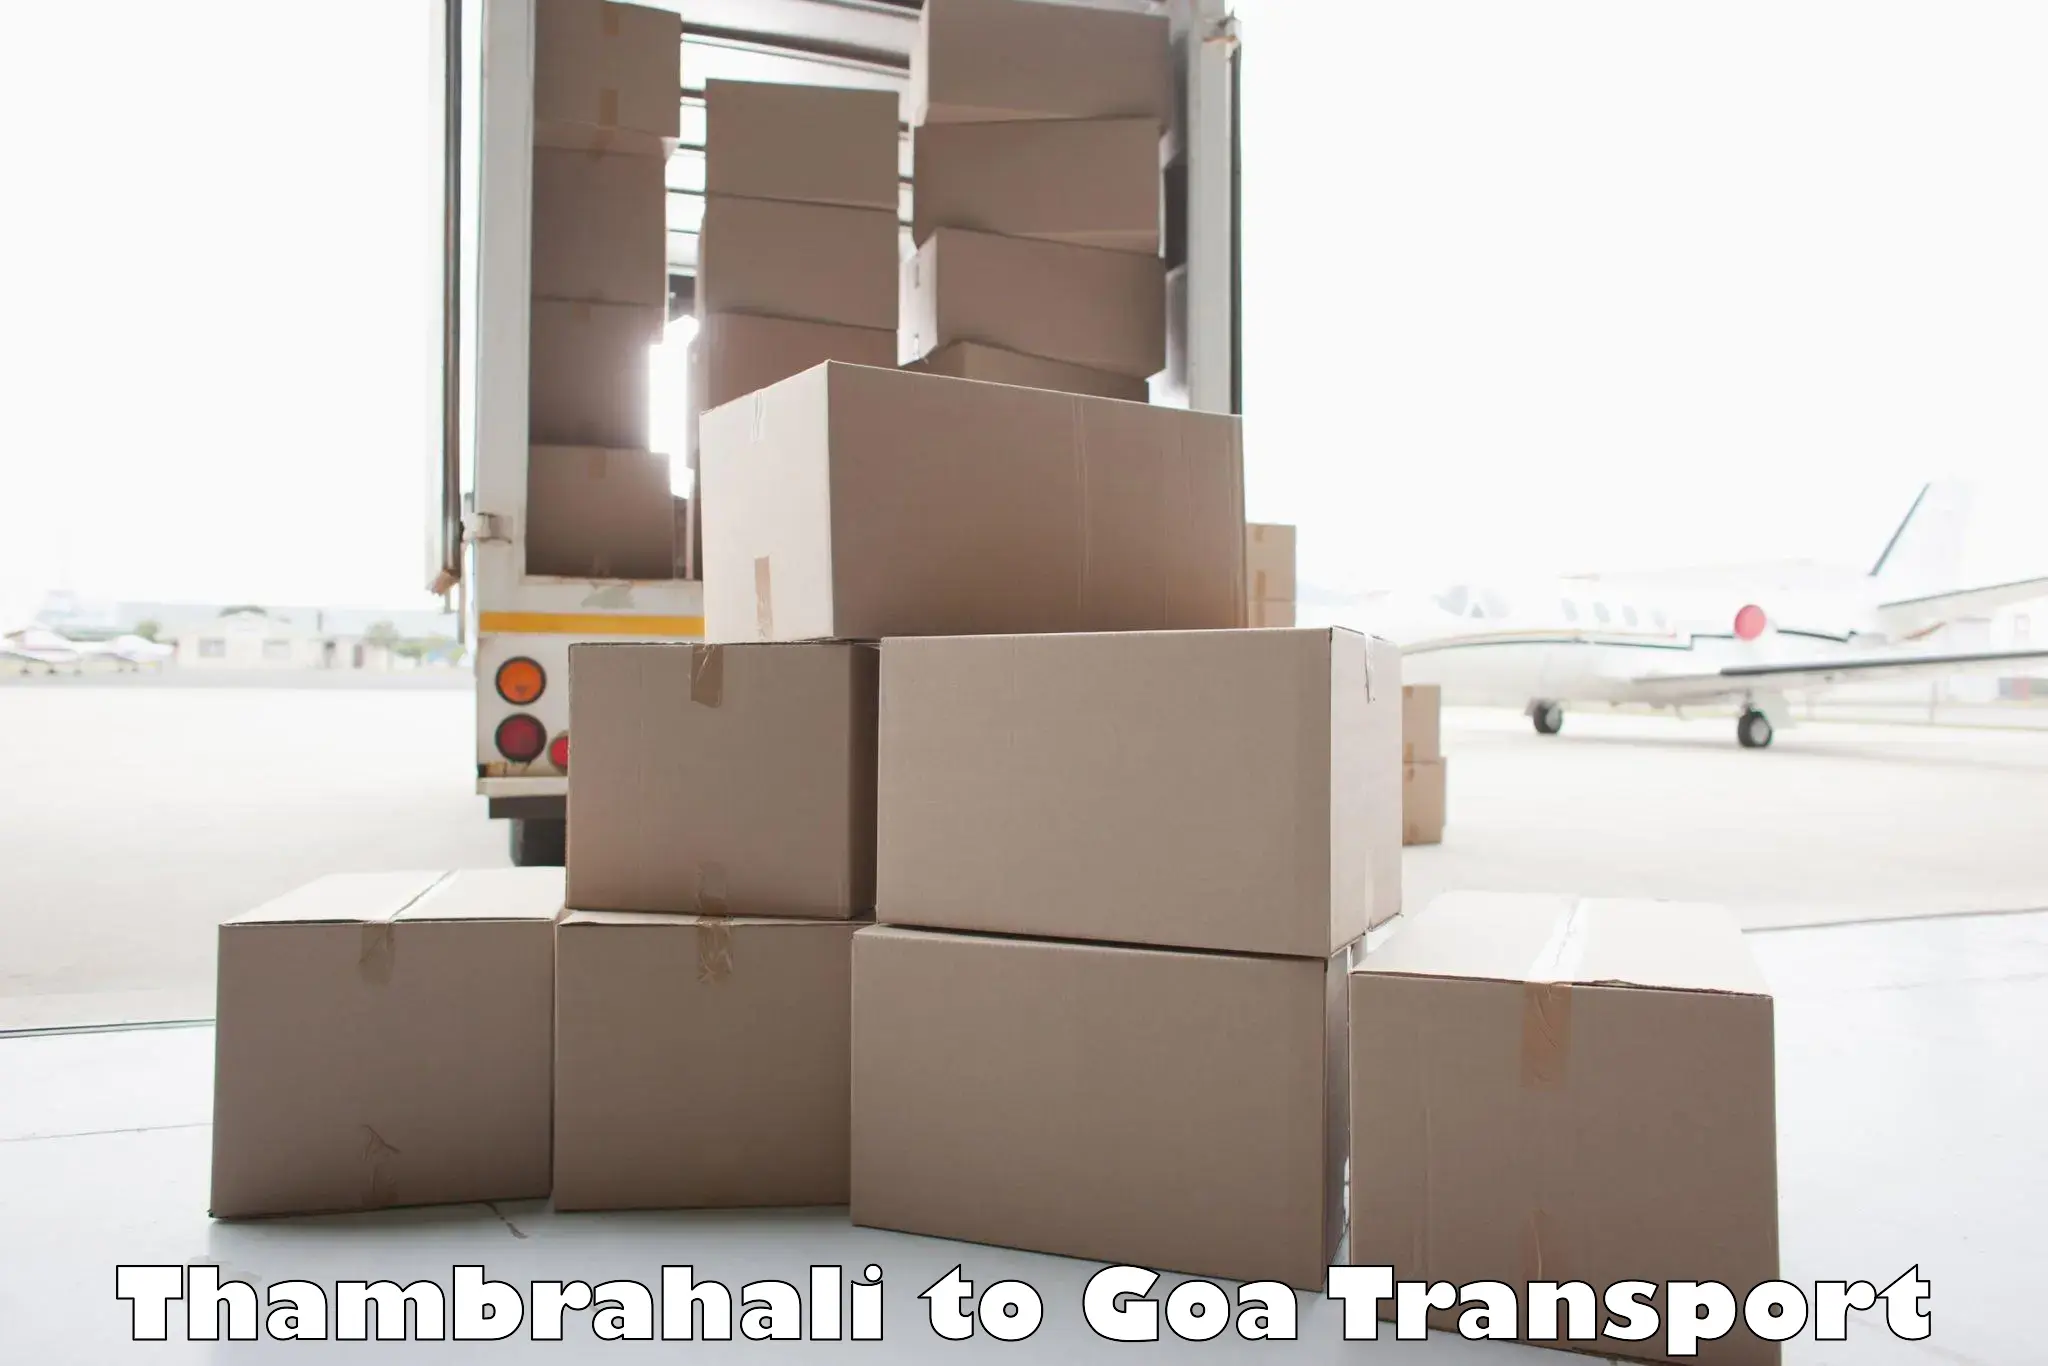 Commercial transport service Thambrahali to Goa